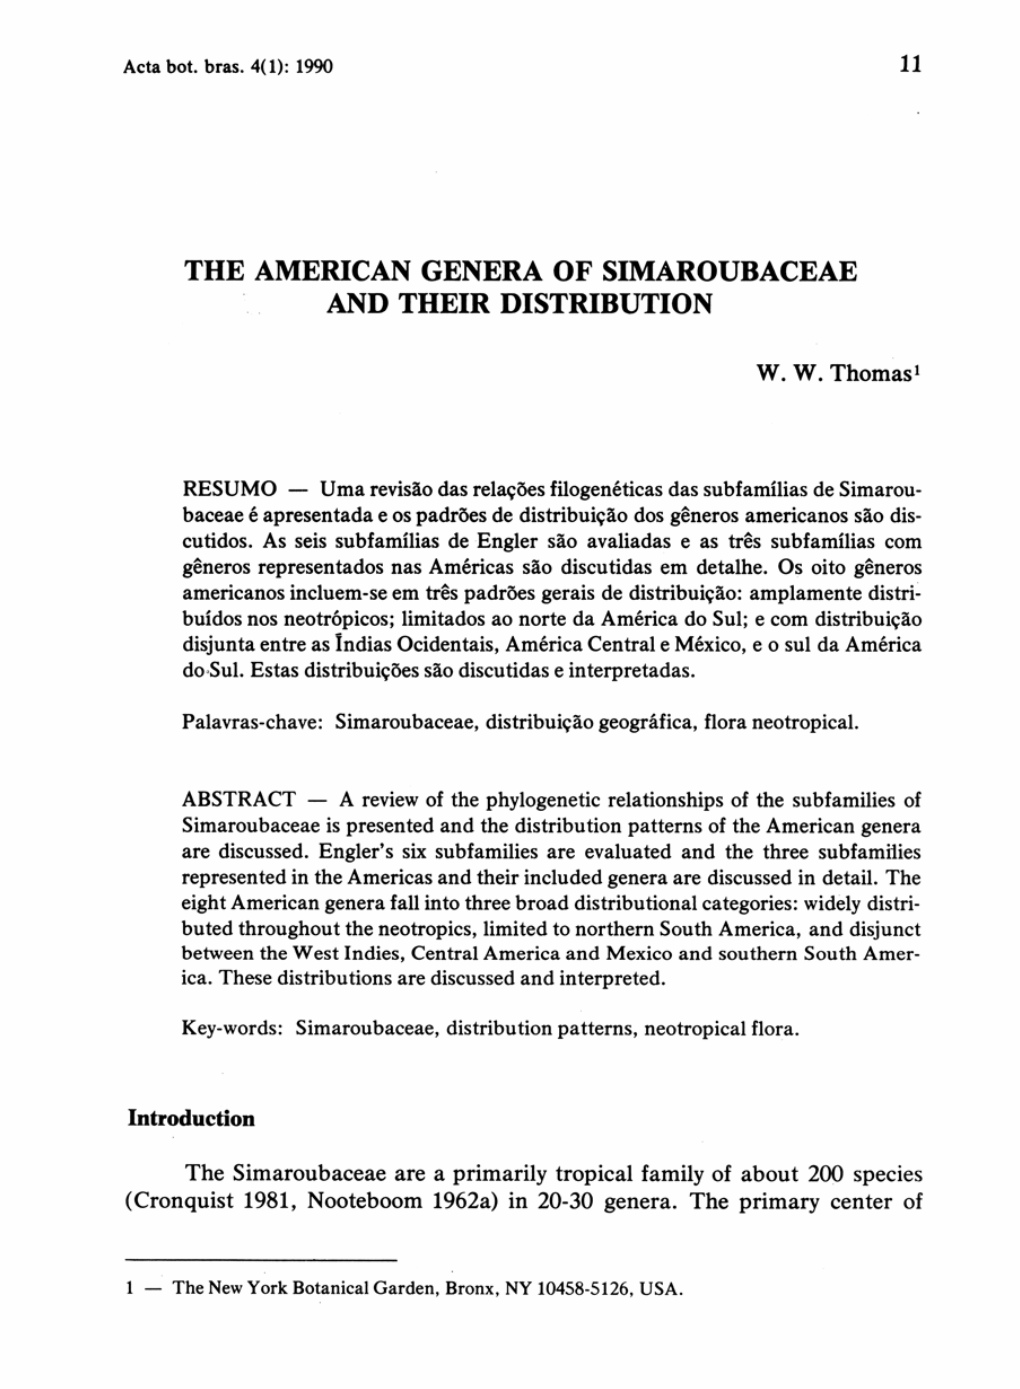 The American Genera of Simaroubaceae and Their Distribution